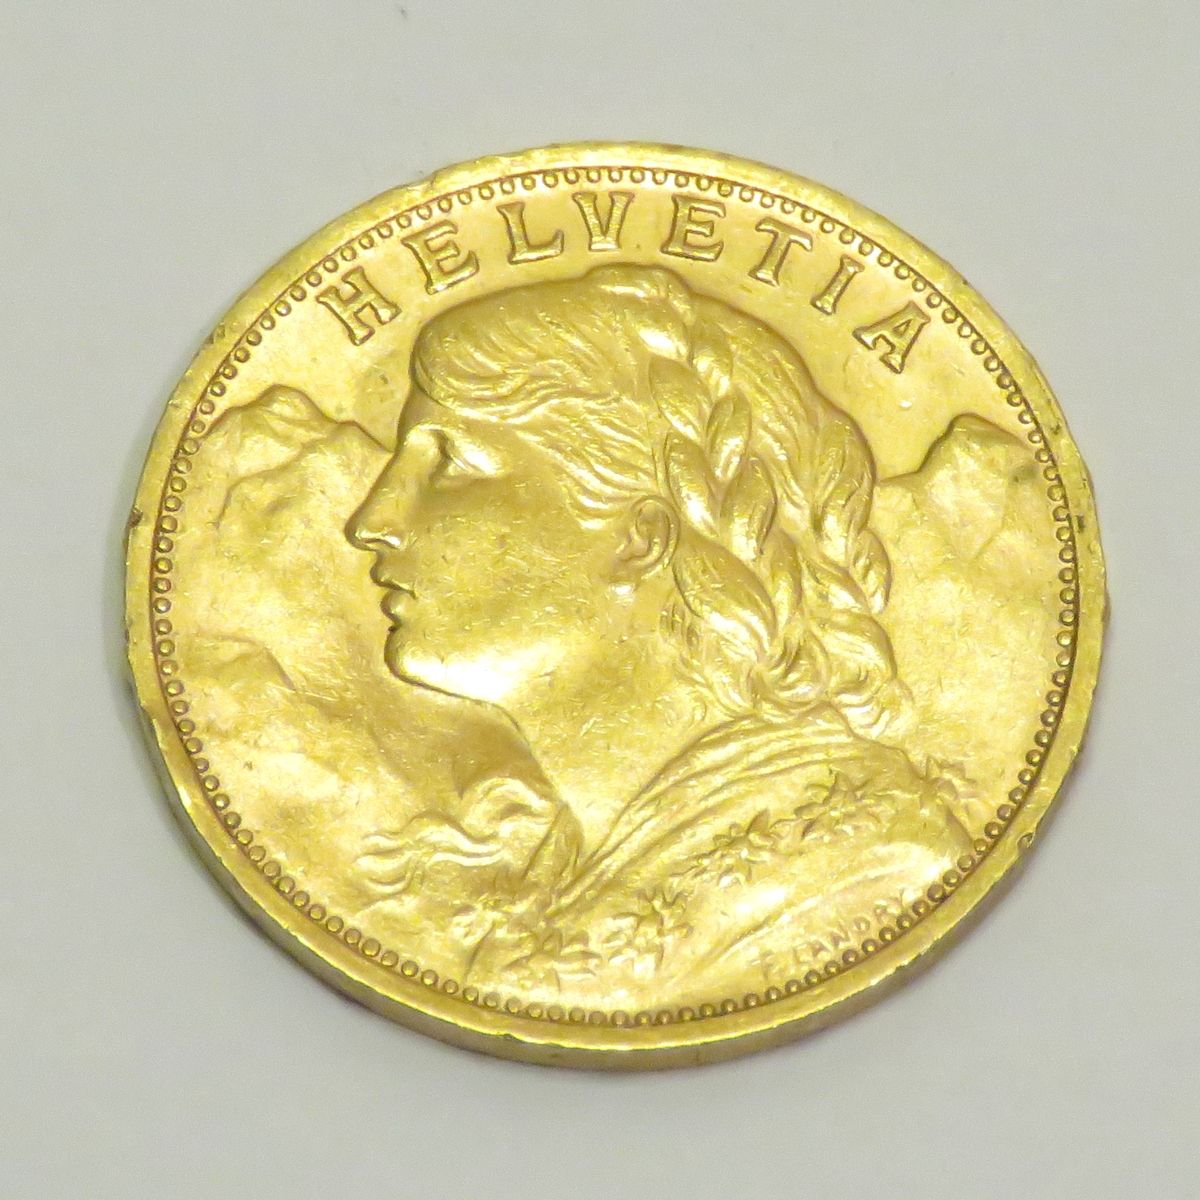 Null 20 Franc gold coin "Helvetia" dated 1935. Weight : 6g45. Diameter : 21mm.